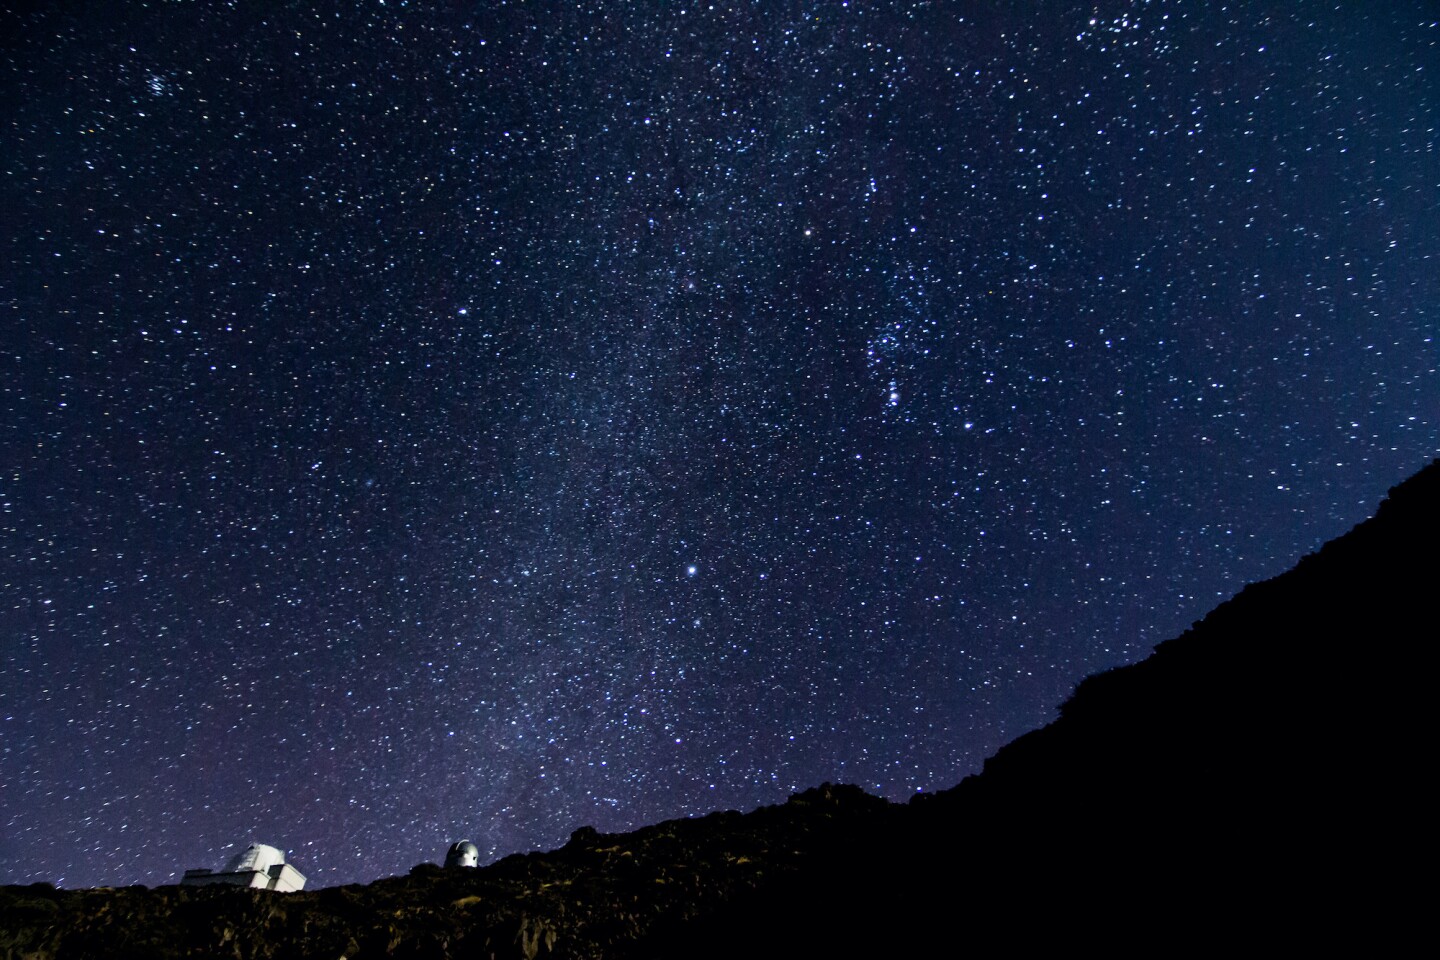 <h2>4. La Palma and Tenerife, Canary Islands</h2> <p> The Canary Islands are home to three UNESCO-recognized “Starlight Reserves” designated by the nonprofit <a class="Link" href="https://en.fundacionstarlight.org/" rel="noopener">Starlight Foundation</a>. The starry night sky can be viewed clearly from across the Atlantic Ocean archipelago, but both professional and amateur astronomers are typically directed to La Palma and Tenerife for the booming astro-tourism industry. These two islands are home to three observatory areas set up by the Tenerife-based <a class="Link" href="https://www.facebook.com/InstitutodeAstrofisicadeCanarias/" rel="noopener">Instituto de Astrofísica de Canarias</a>. Some of the best places to stargaze on these islands include the Garajonay Summit and San Bartolo Mountain (La Palma) and El Palmar viewpoint and Guajara Mountain (Tenerife).</p>